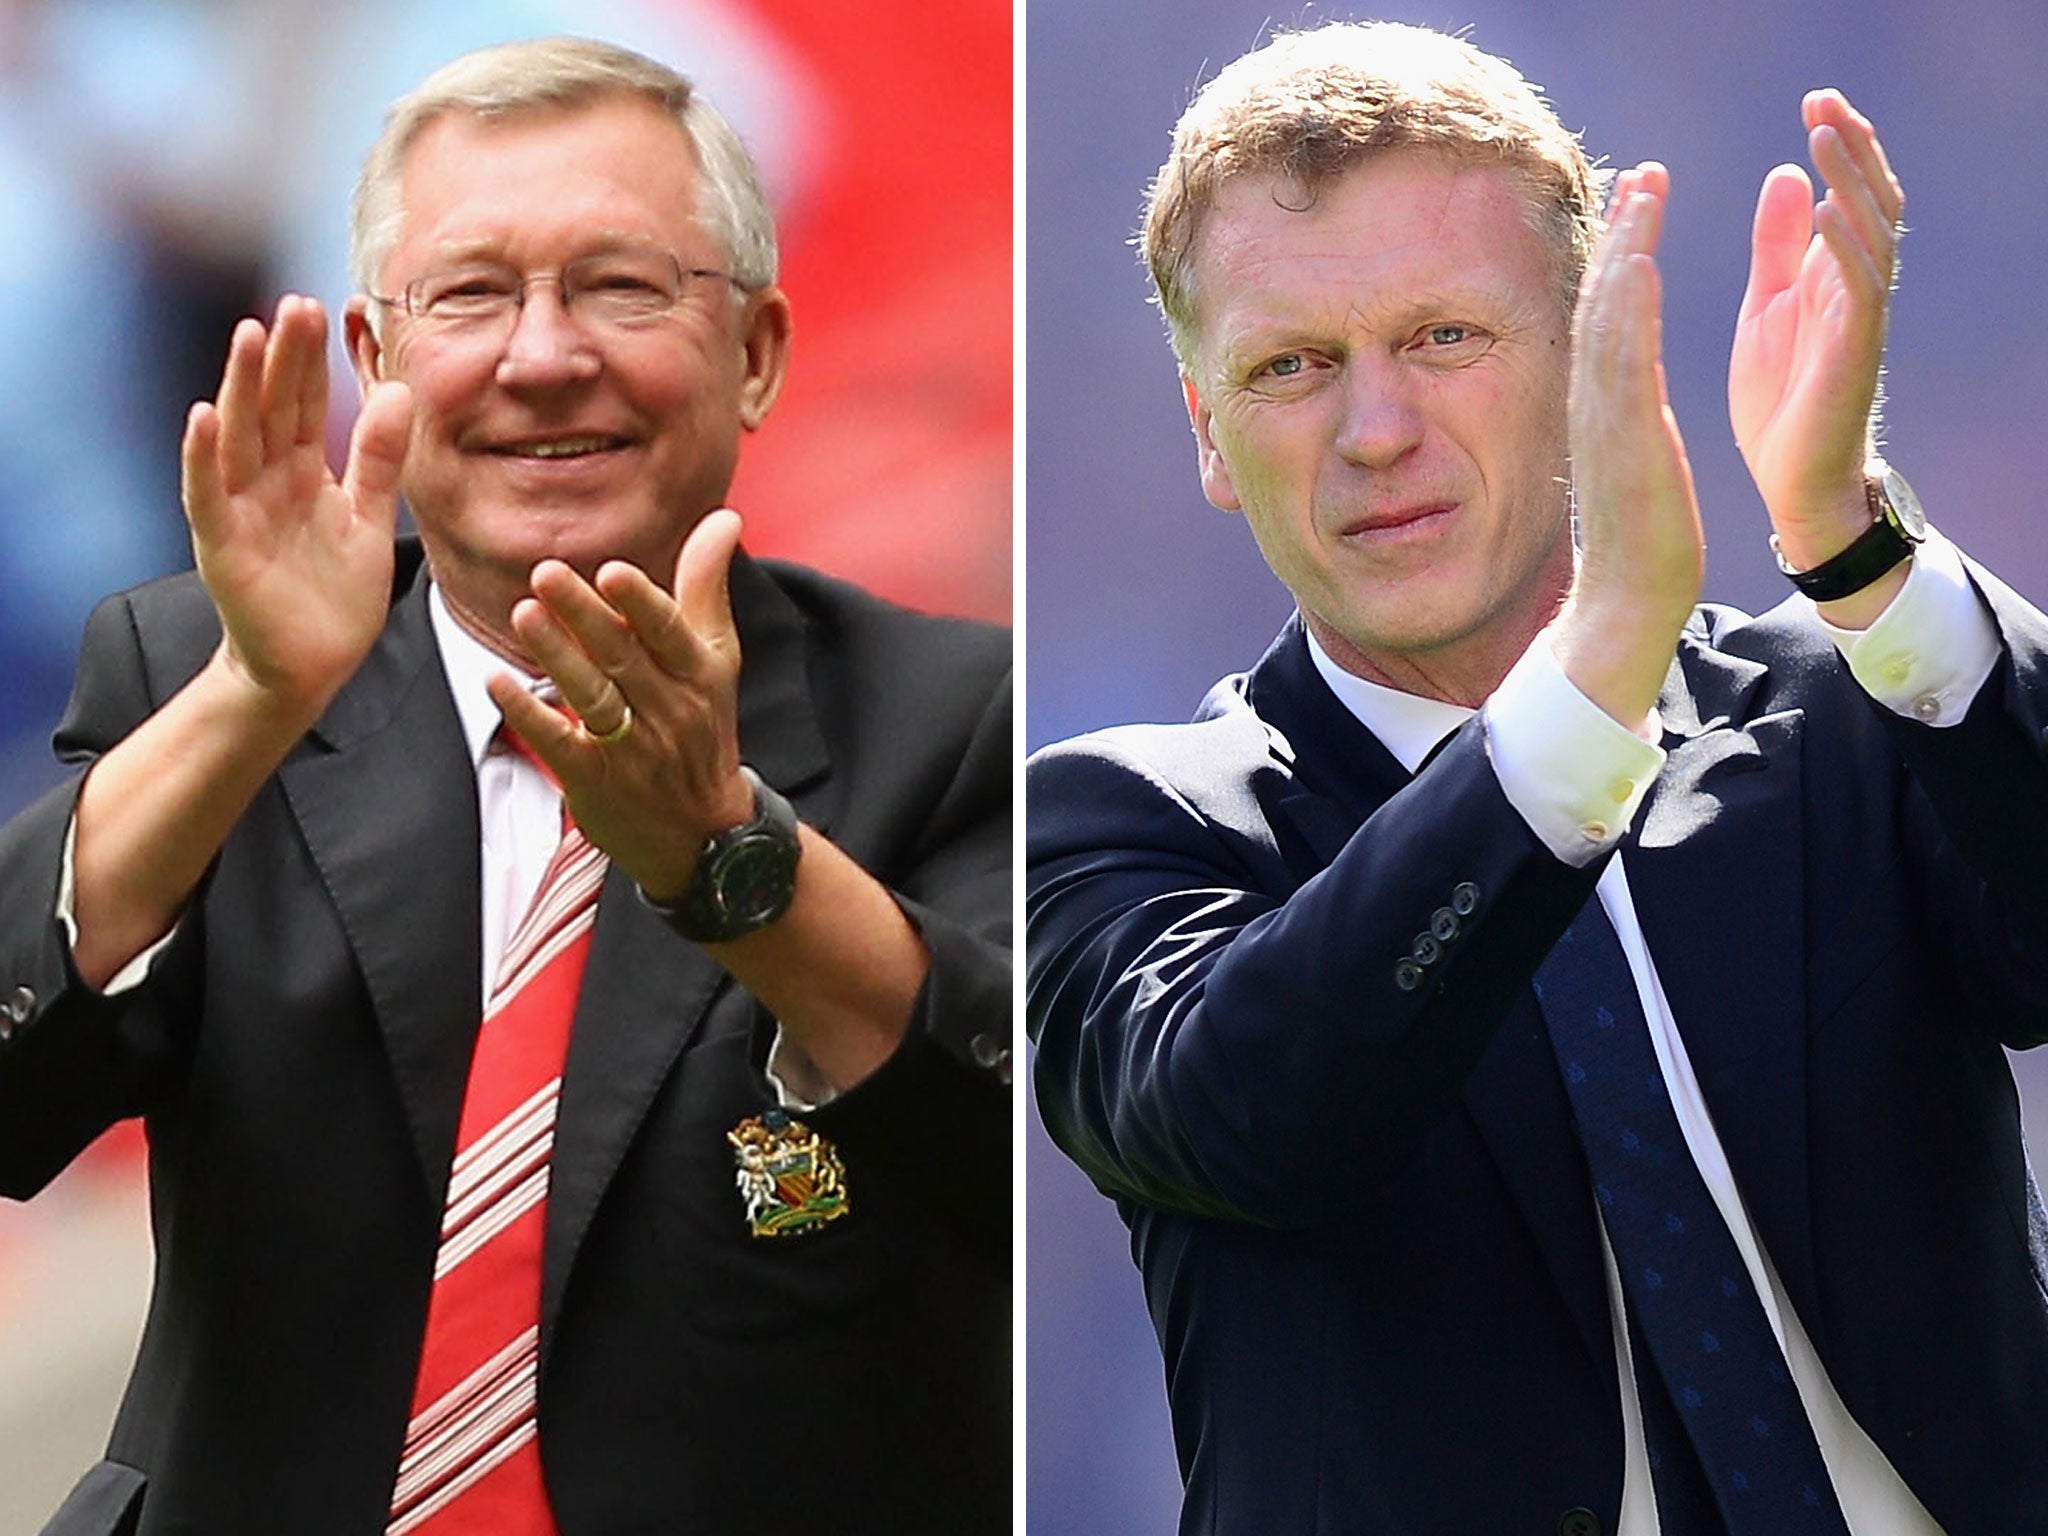 Sir Alex Ferguson (left): 'When we discussed the candidates that we felt had the right attributes we unanimously agreed on David Moyes' David Moyes (right): 'It’s a great honour to be asked to be the next manager of Manchester United'